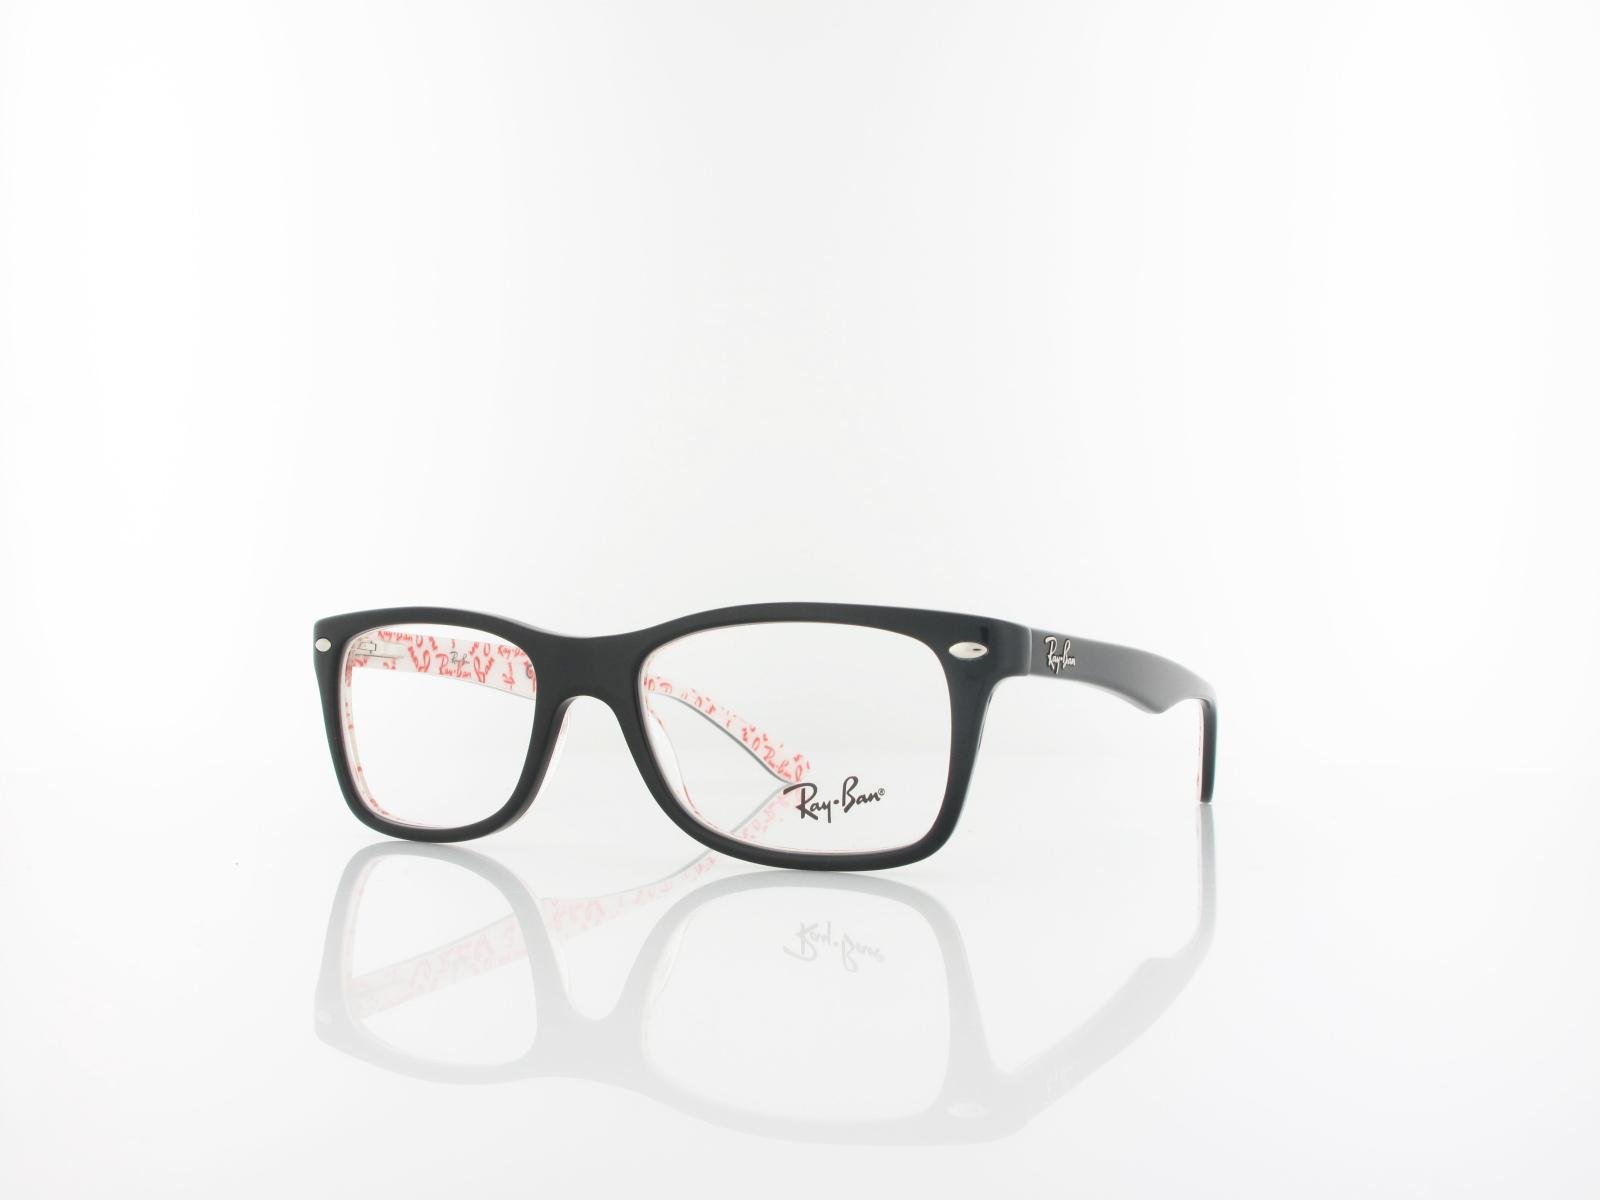 Ray Ban | RX5228 5014 50 | top black on texture white